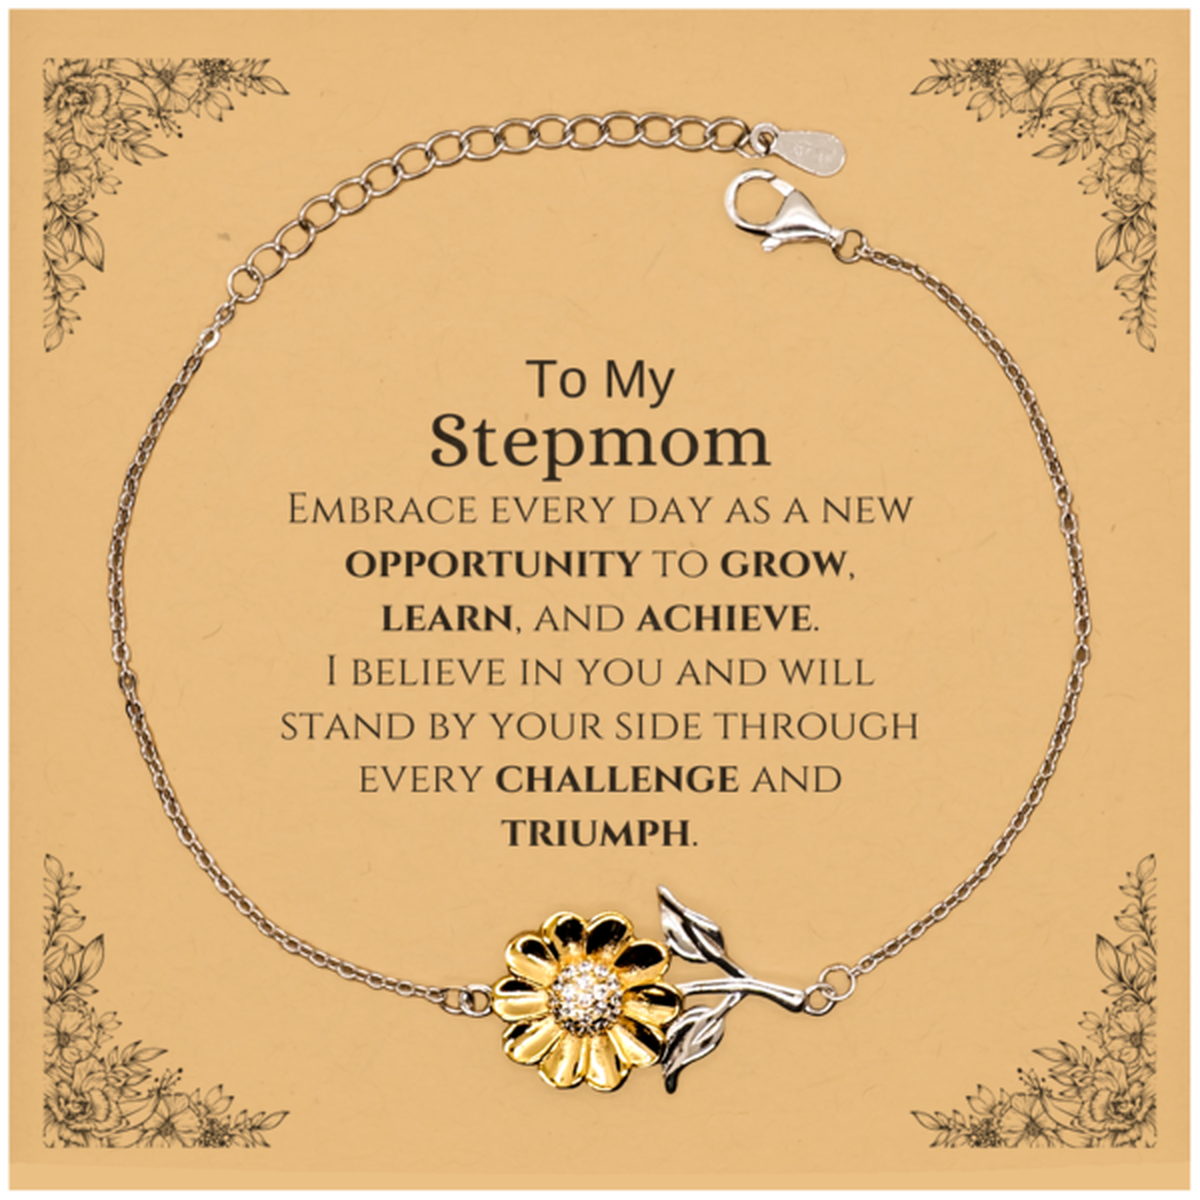 To My Stepmom Gifts, I believe in you and will stand by your side, Inspirational Sunflower Bracelet For Stepmom, Birthday Christmas Motivational Stepmom Gifts